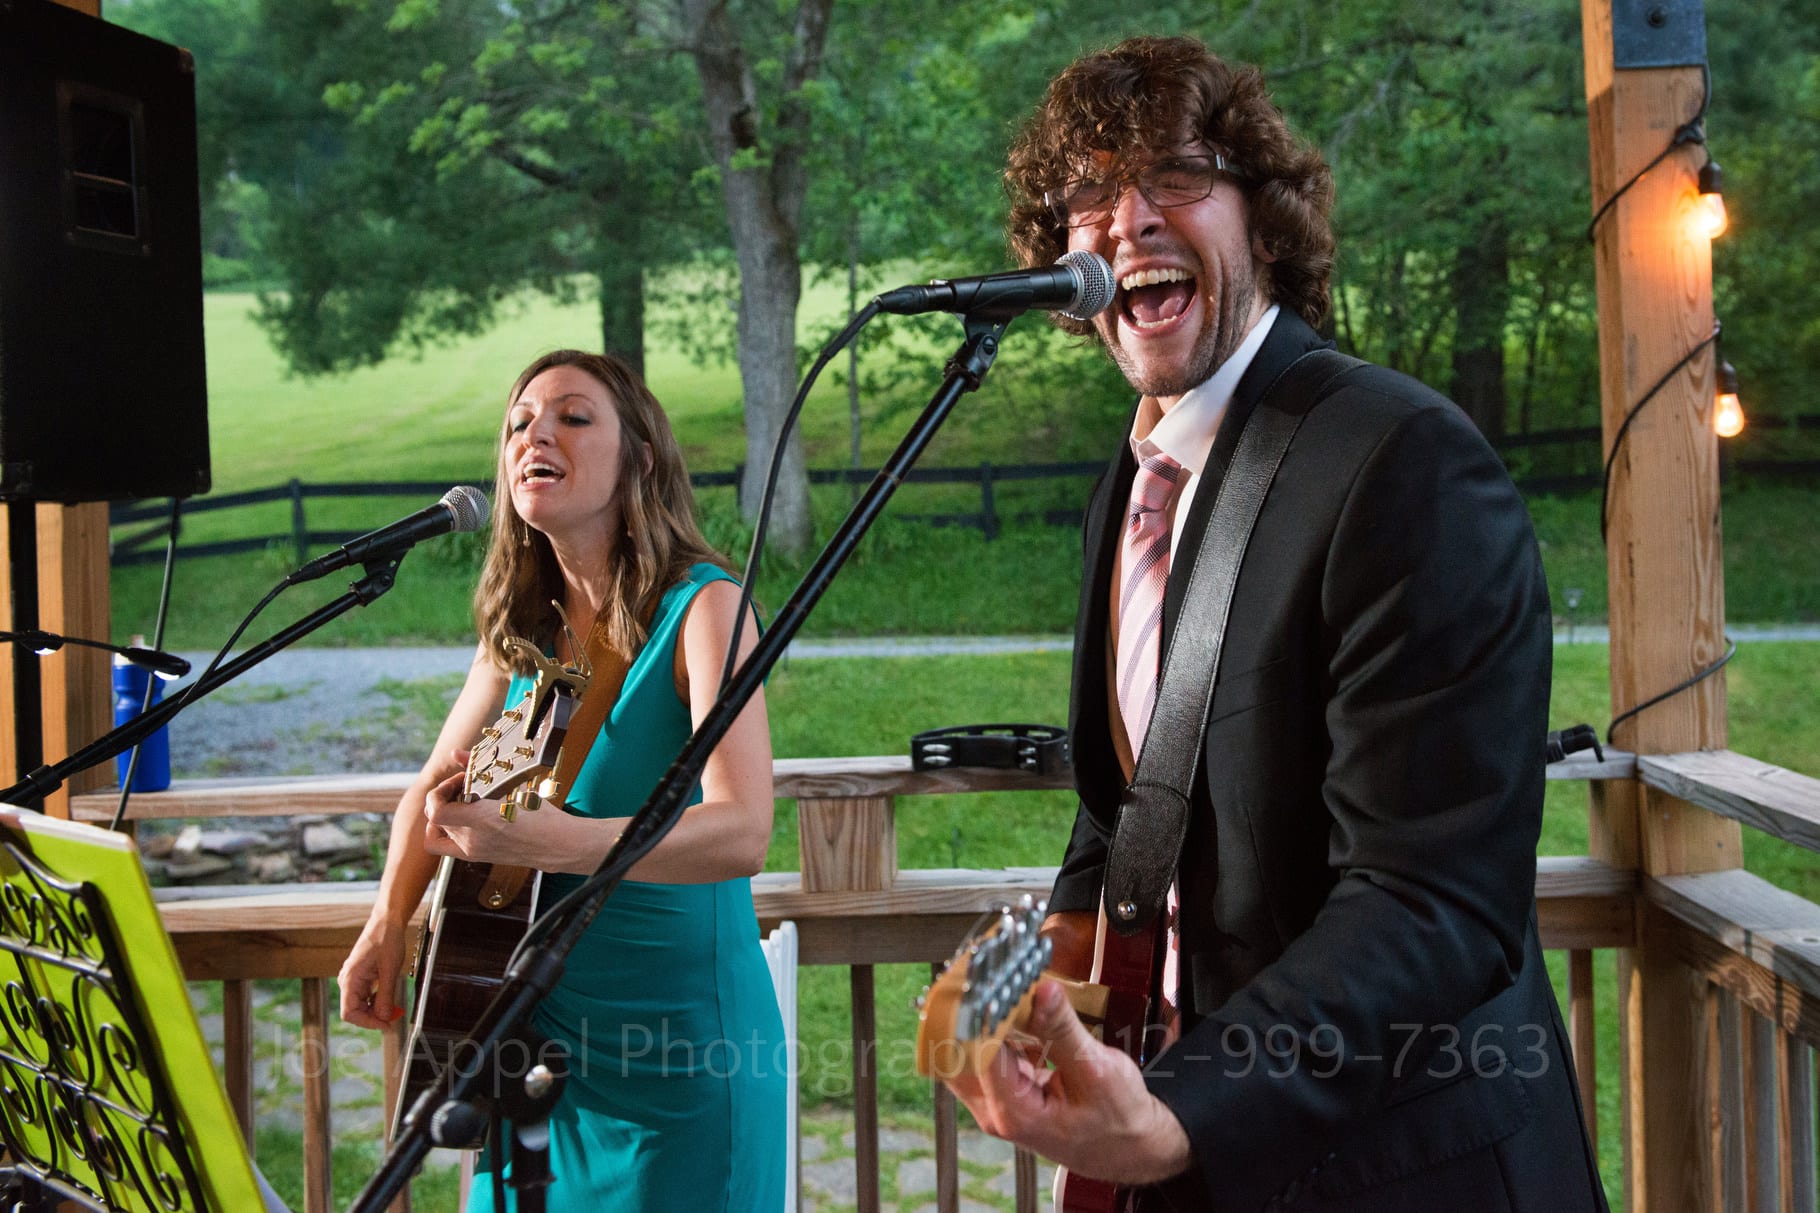 guitar player sings passionately into a microphone as a woman in a blue dress accompanies him during a Chanteclaire Farm Wedding.